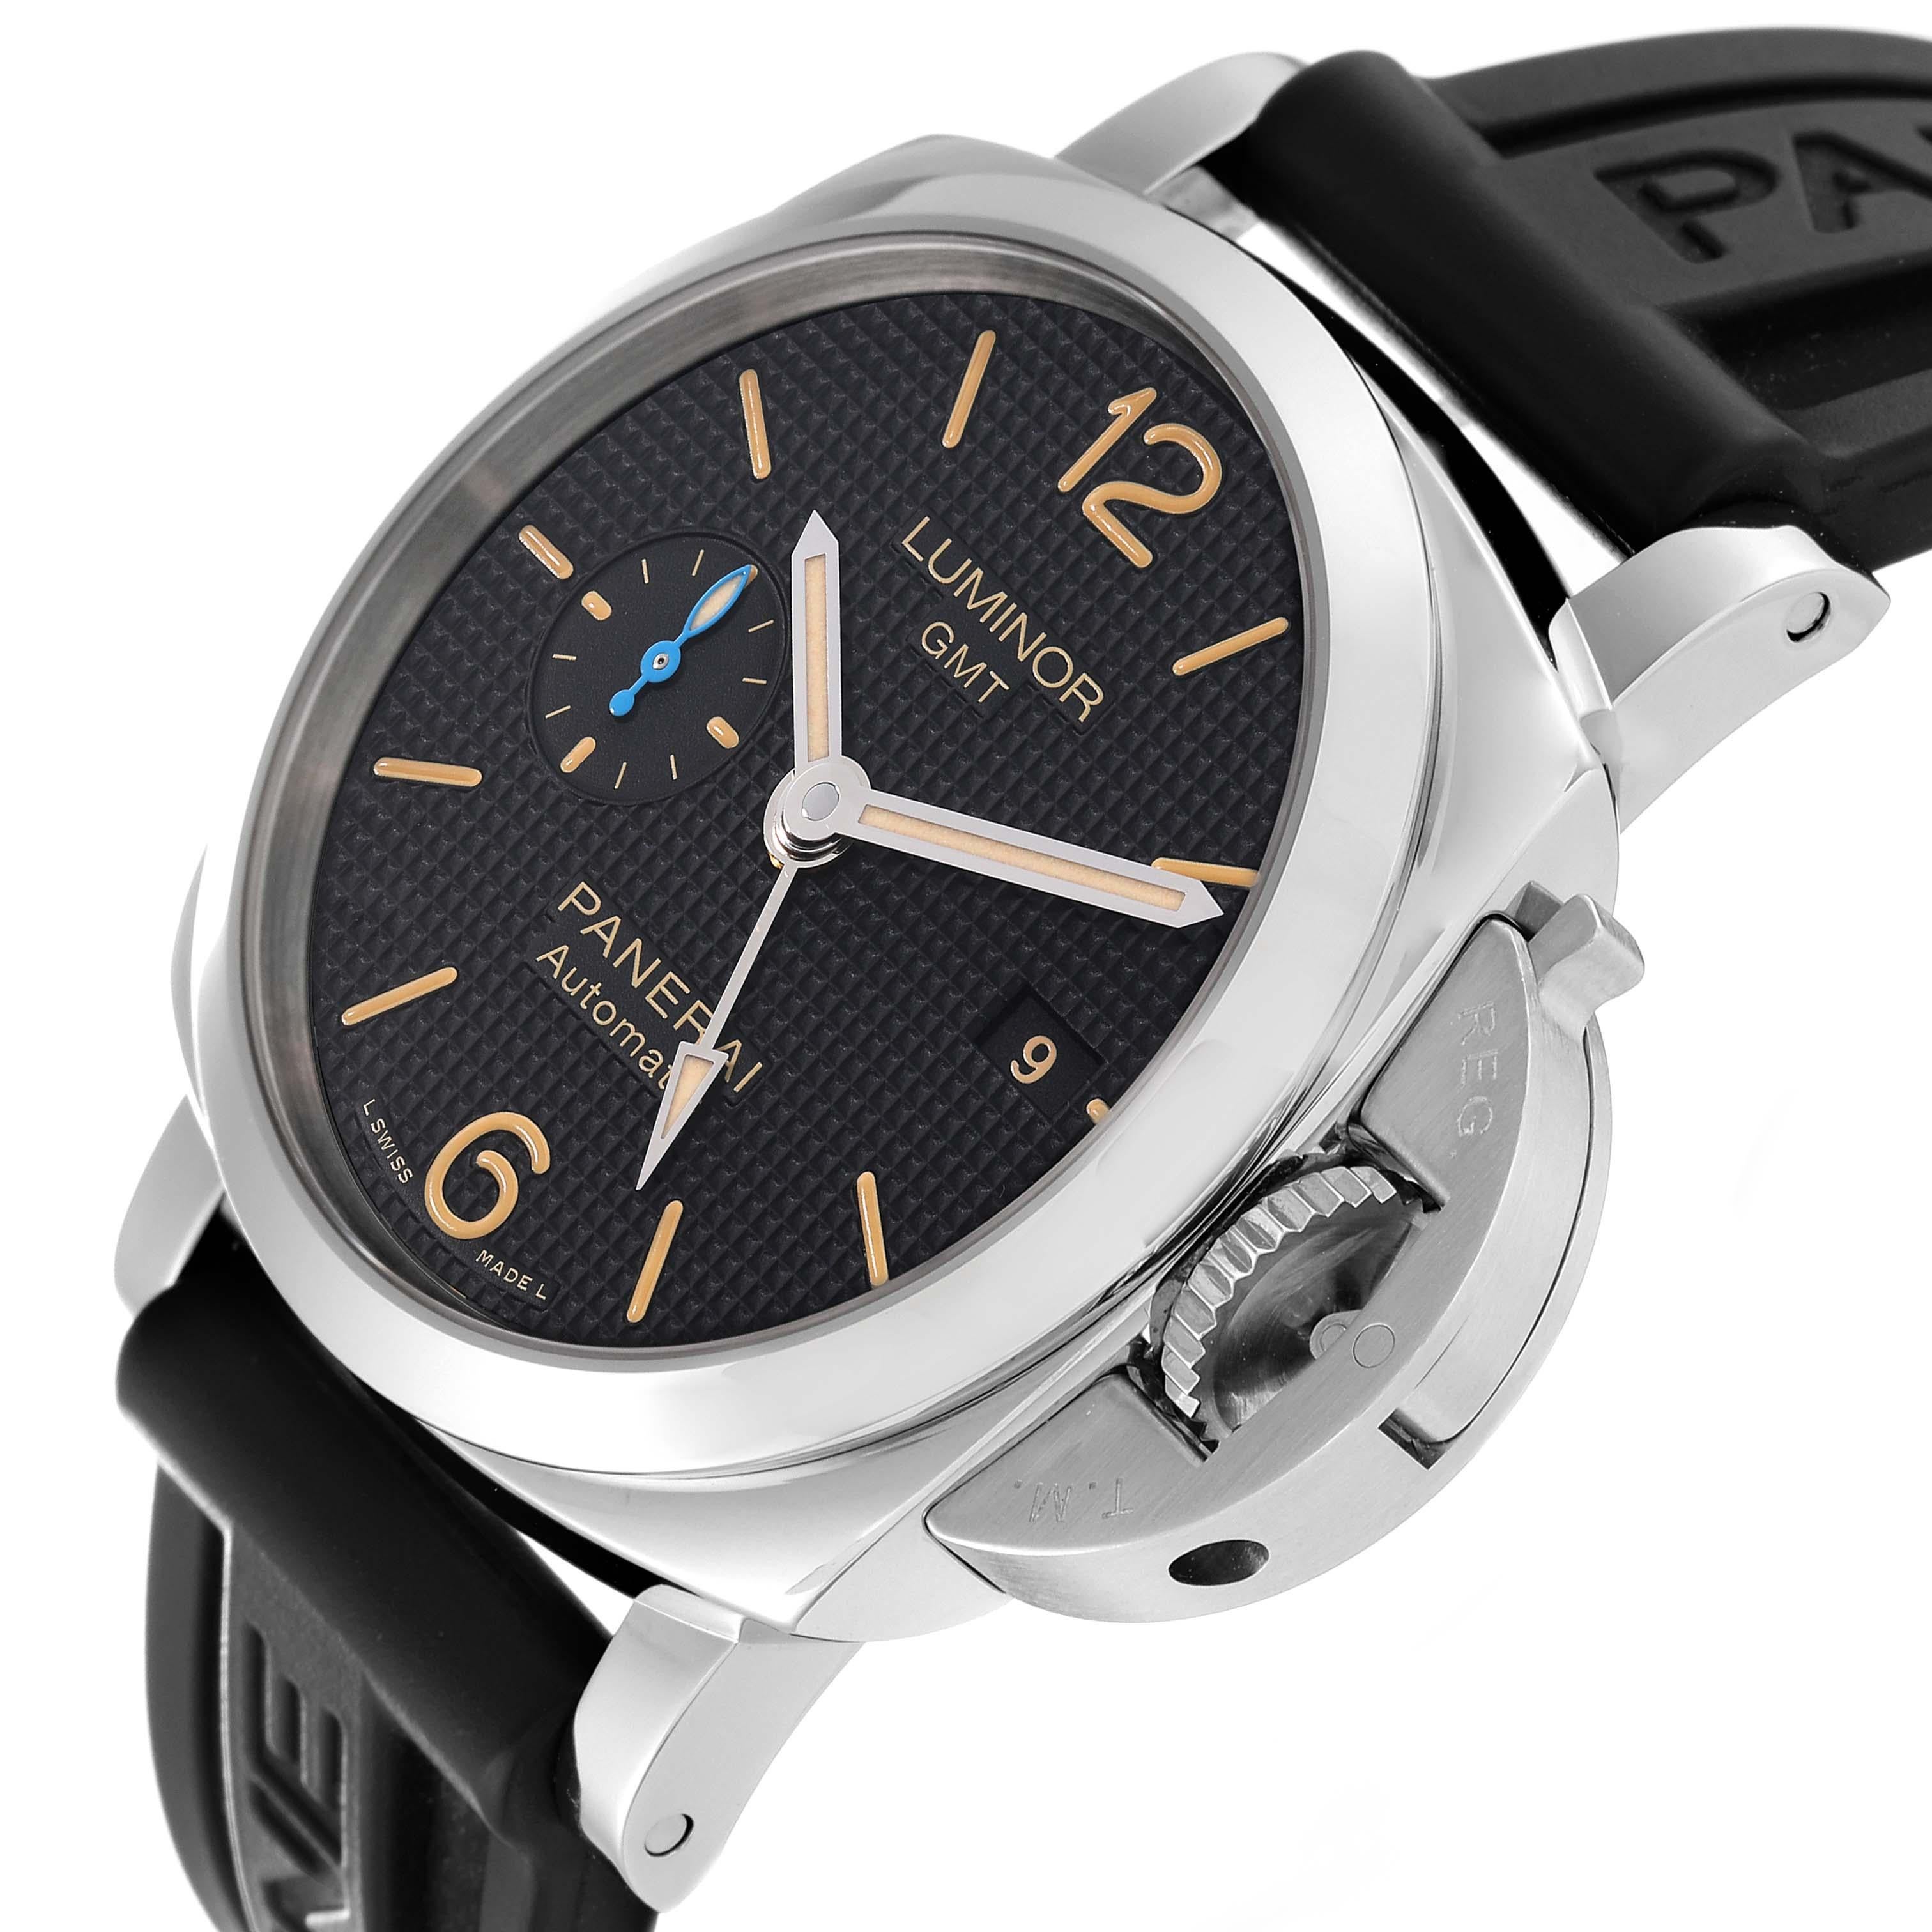 Panerai Luminor 1950 GMT 42mm Steel Mens Watch PAM01535 Papers. Automatic self-winding movement. Caliber P.9011. Stainless steel cushion shaped case 42 mm in diameter. Panerai patented crown protector. Transparent exhibition sapphire crystal